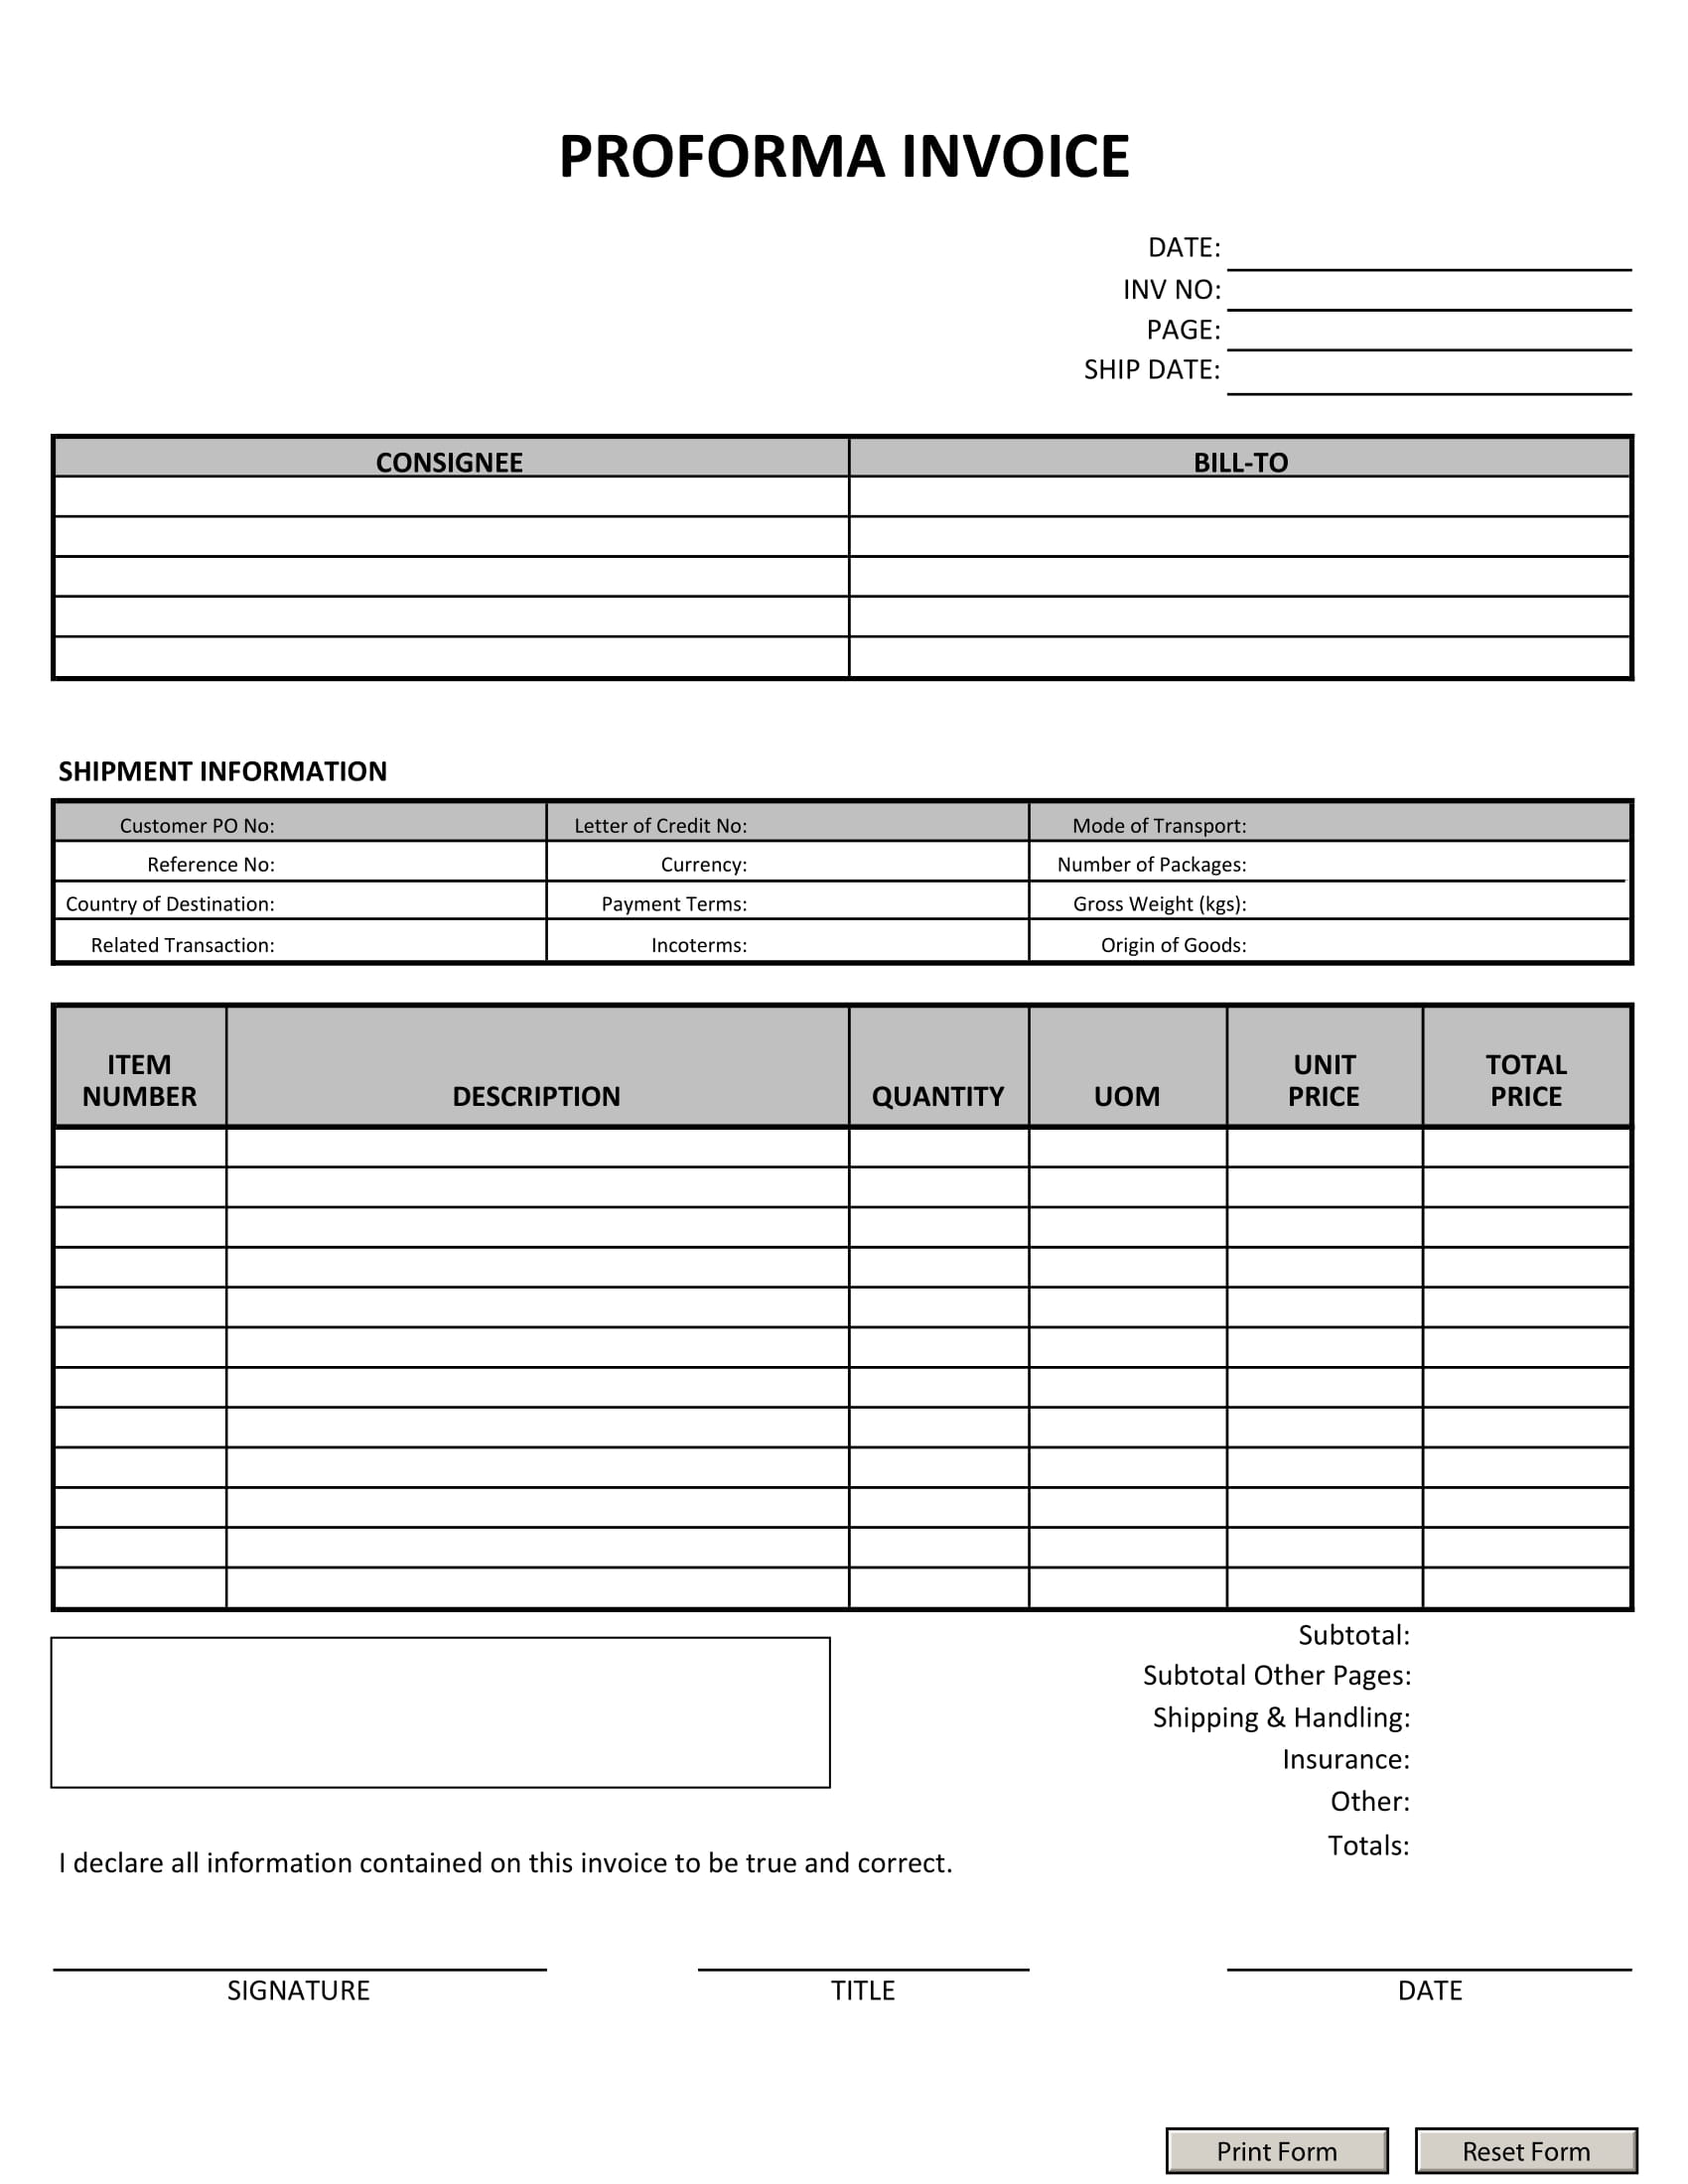 concise pro forma invoice example